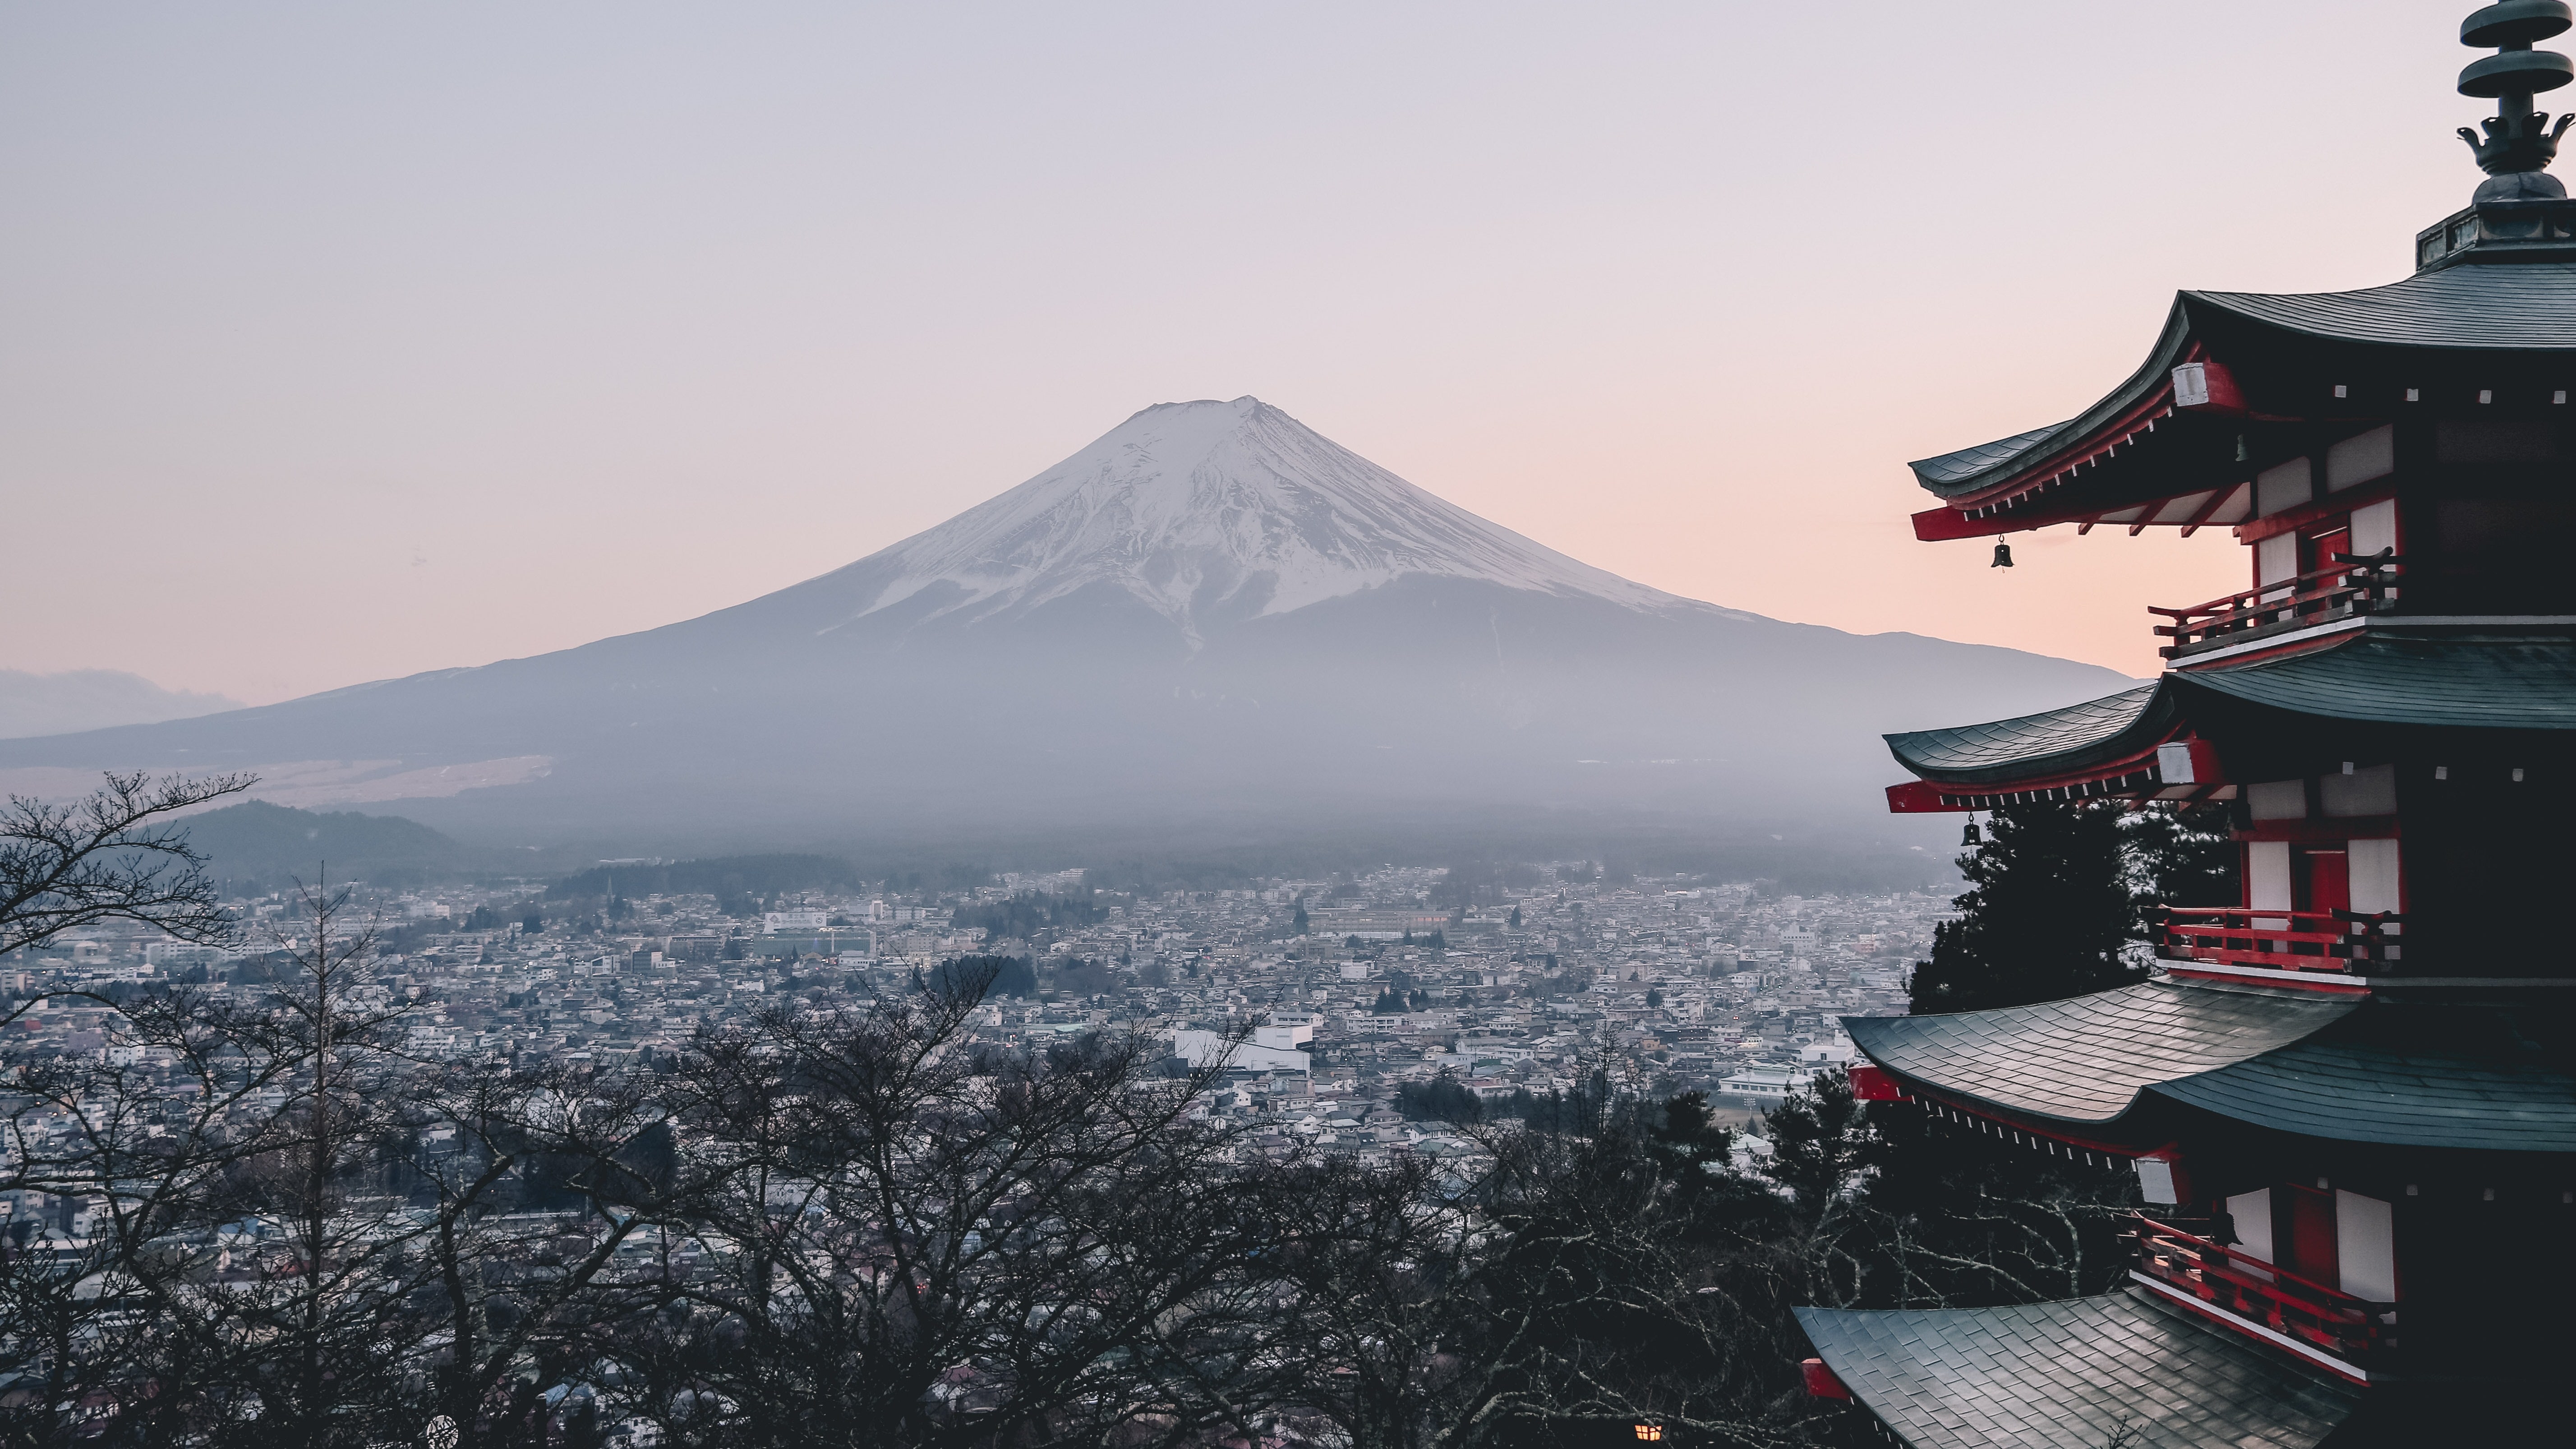 Japan Is Reopening To Visa Free Travel In October—Here's What To Know For Your Next Visit. Condé Nast Traveler